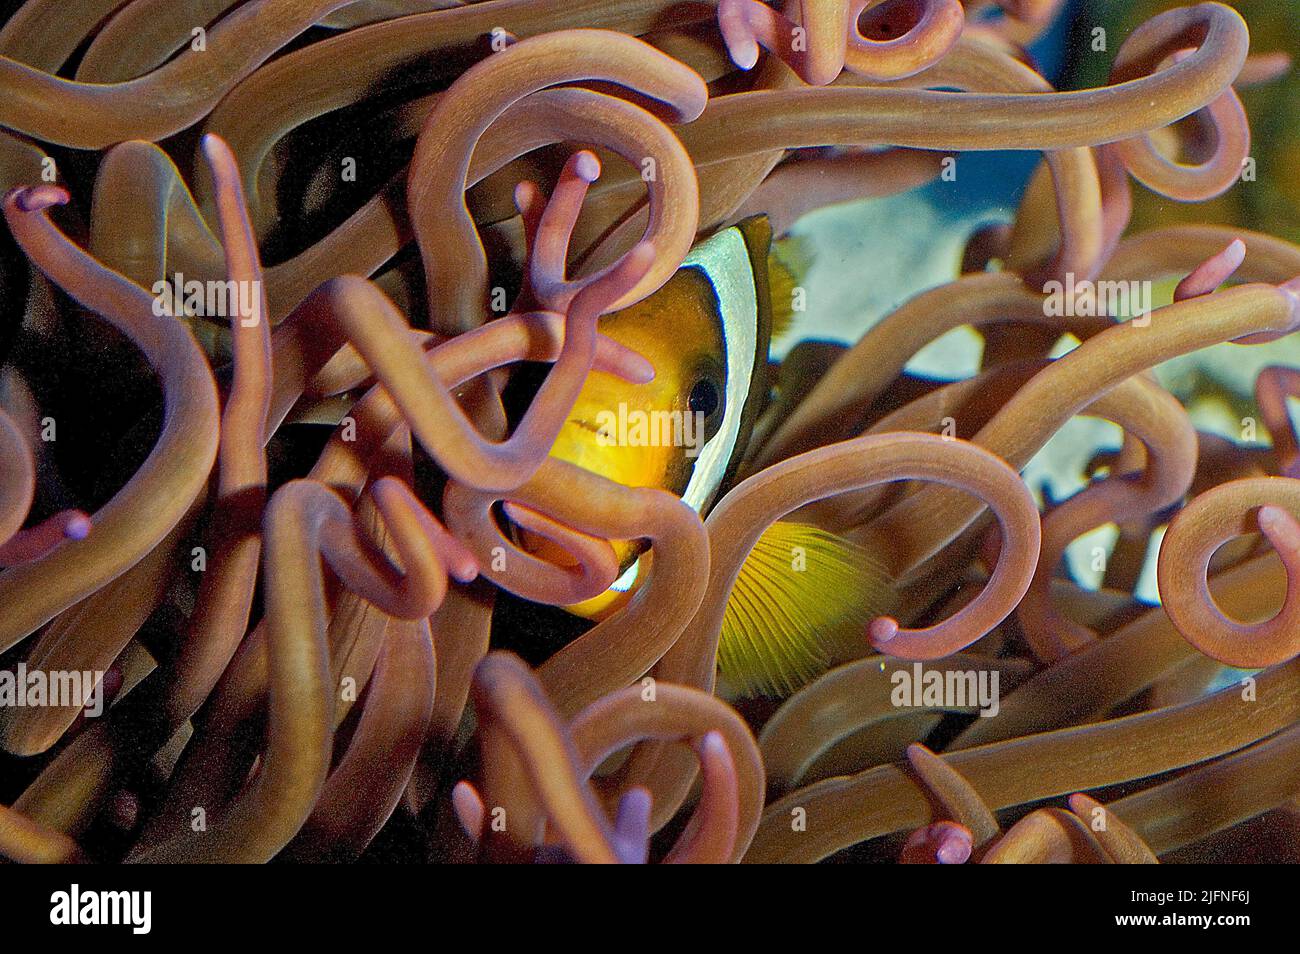 Clownfish (Amphiprion sp.) among the curled tentacles of a host-sea anemone. Stock Photo